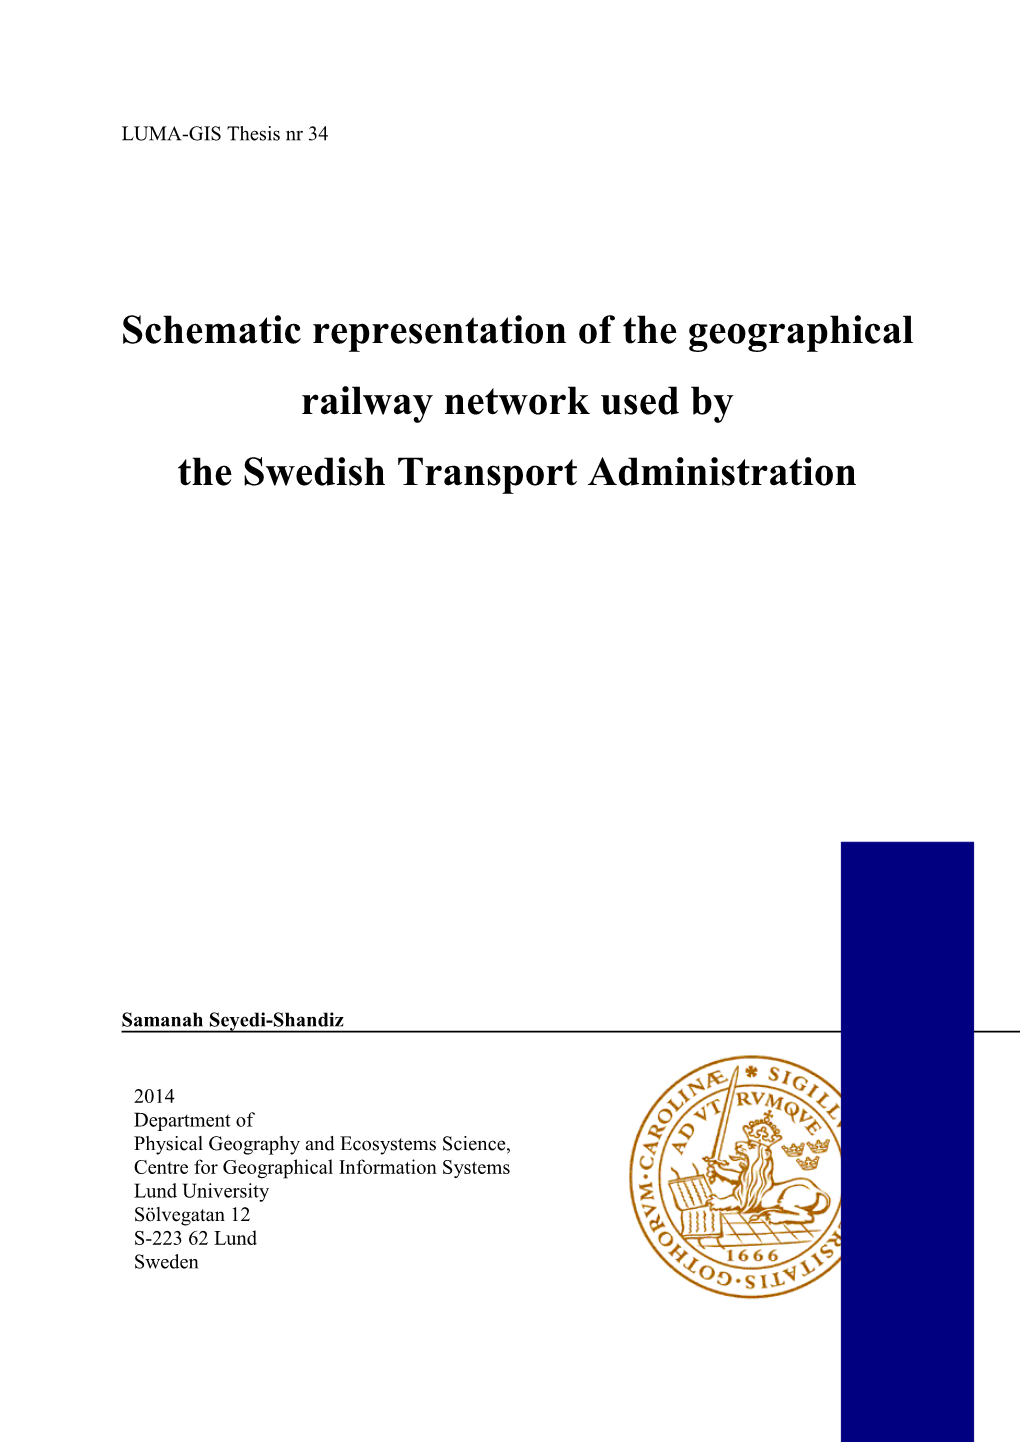 Schematic Representation of the Geographical Railway Network Used